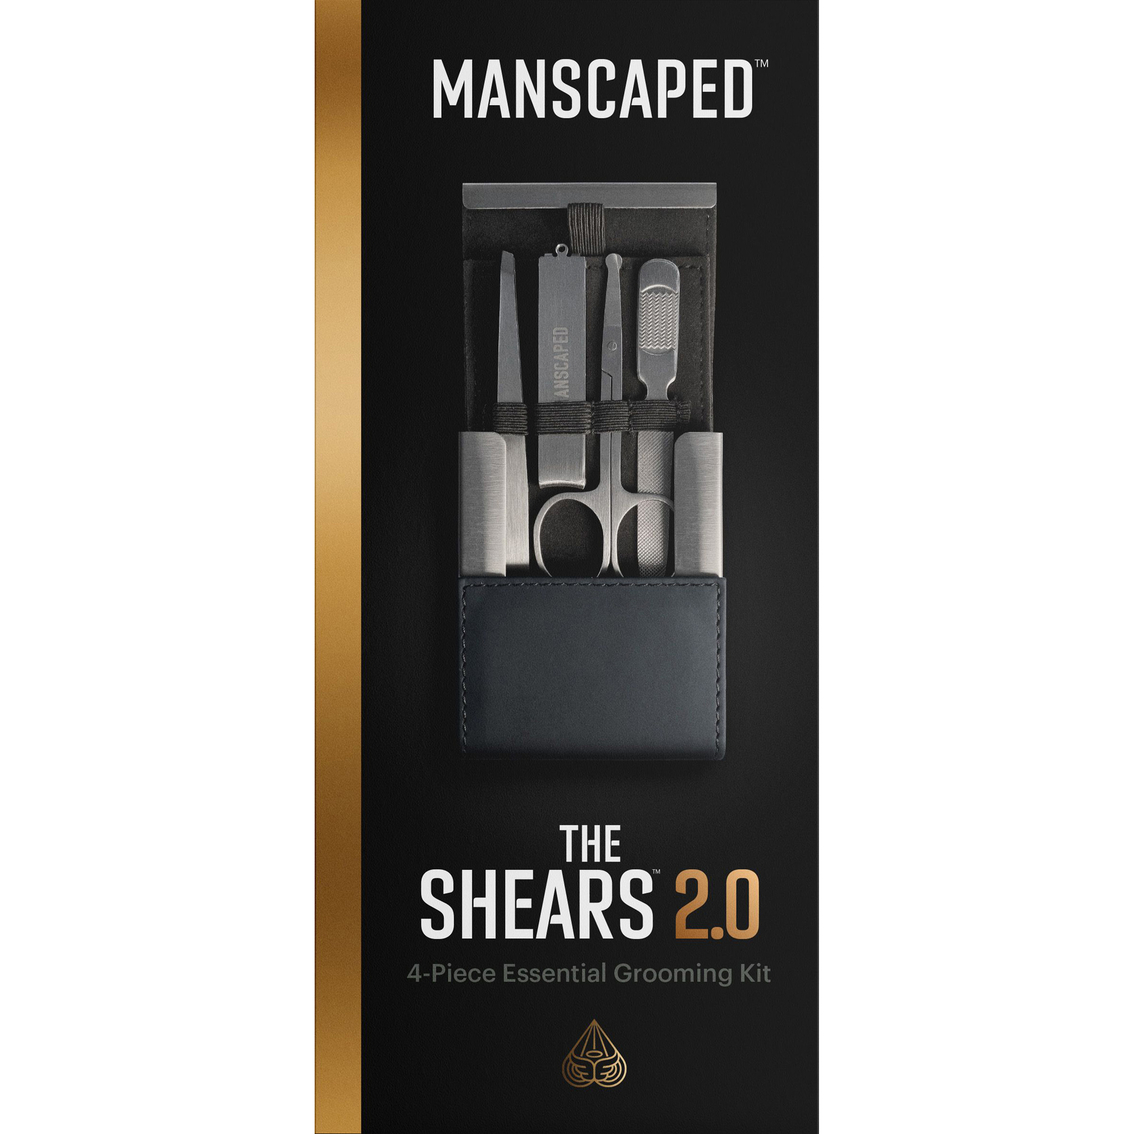 Manscaped Shears 2.0 Nail Grooming 4 pc. Set - Image 2 of 2